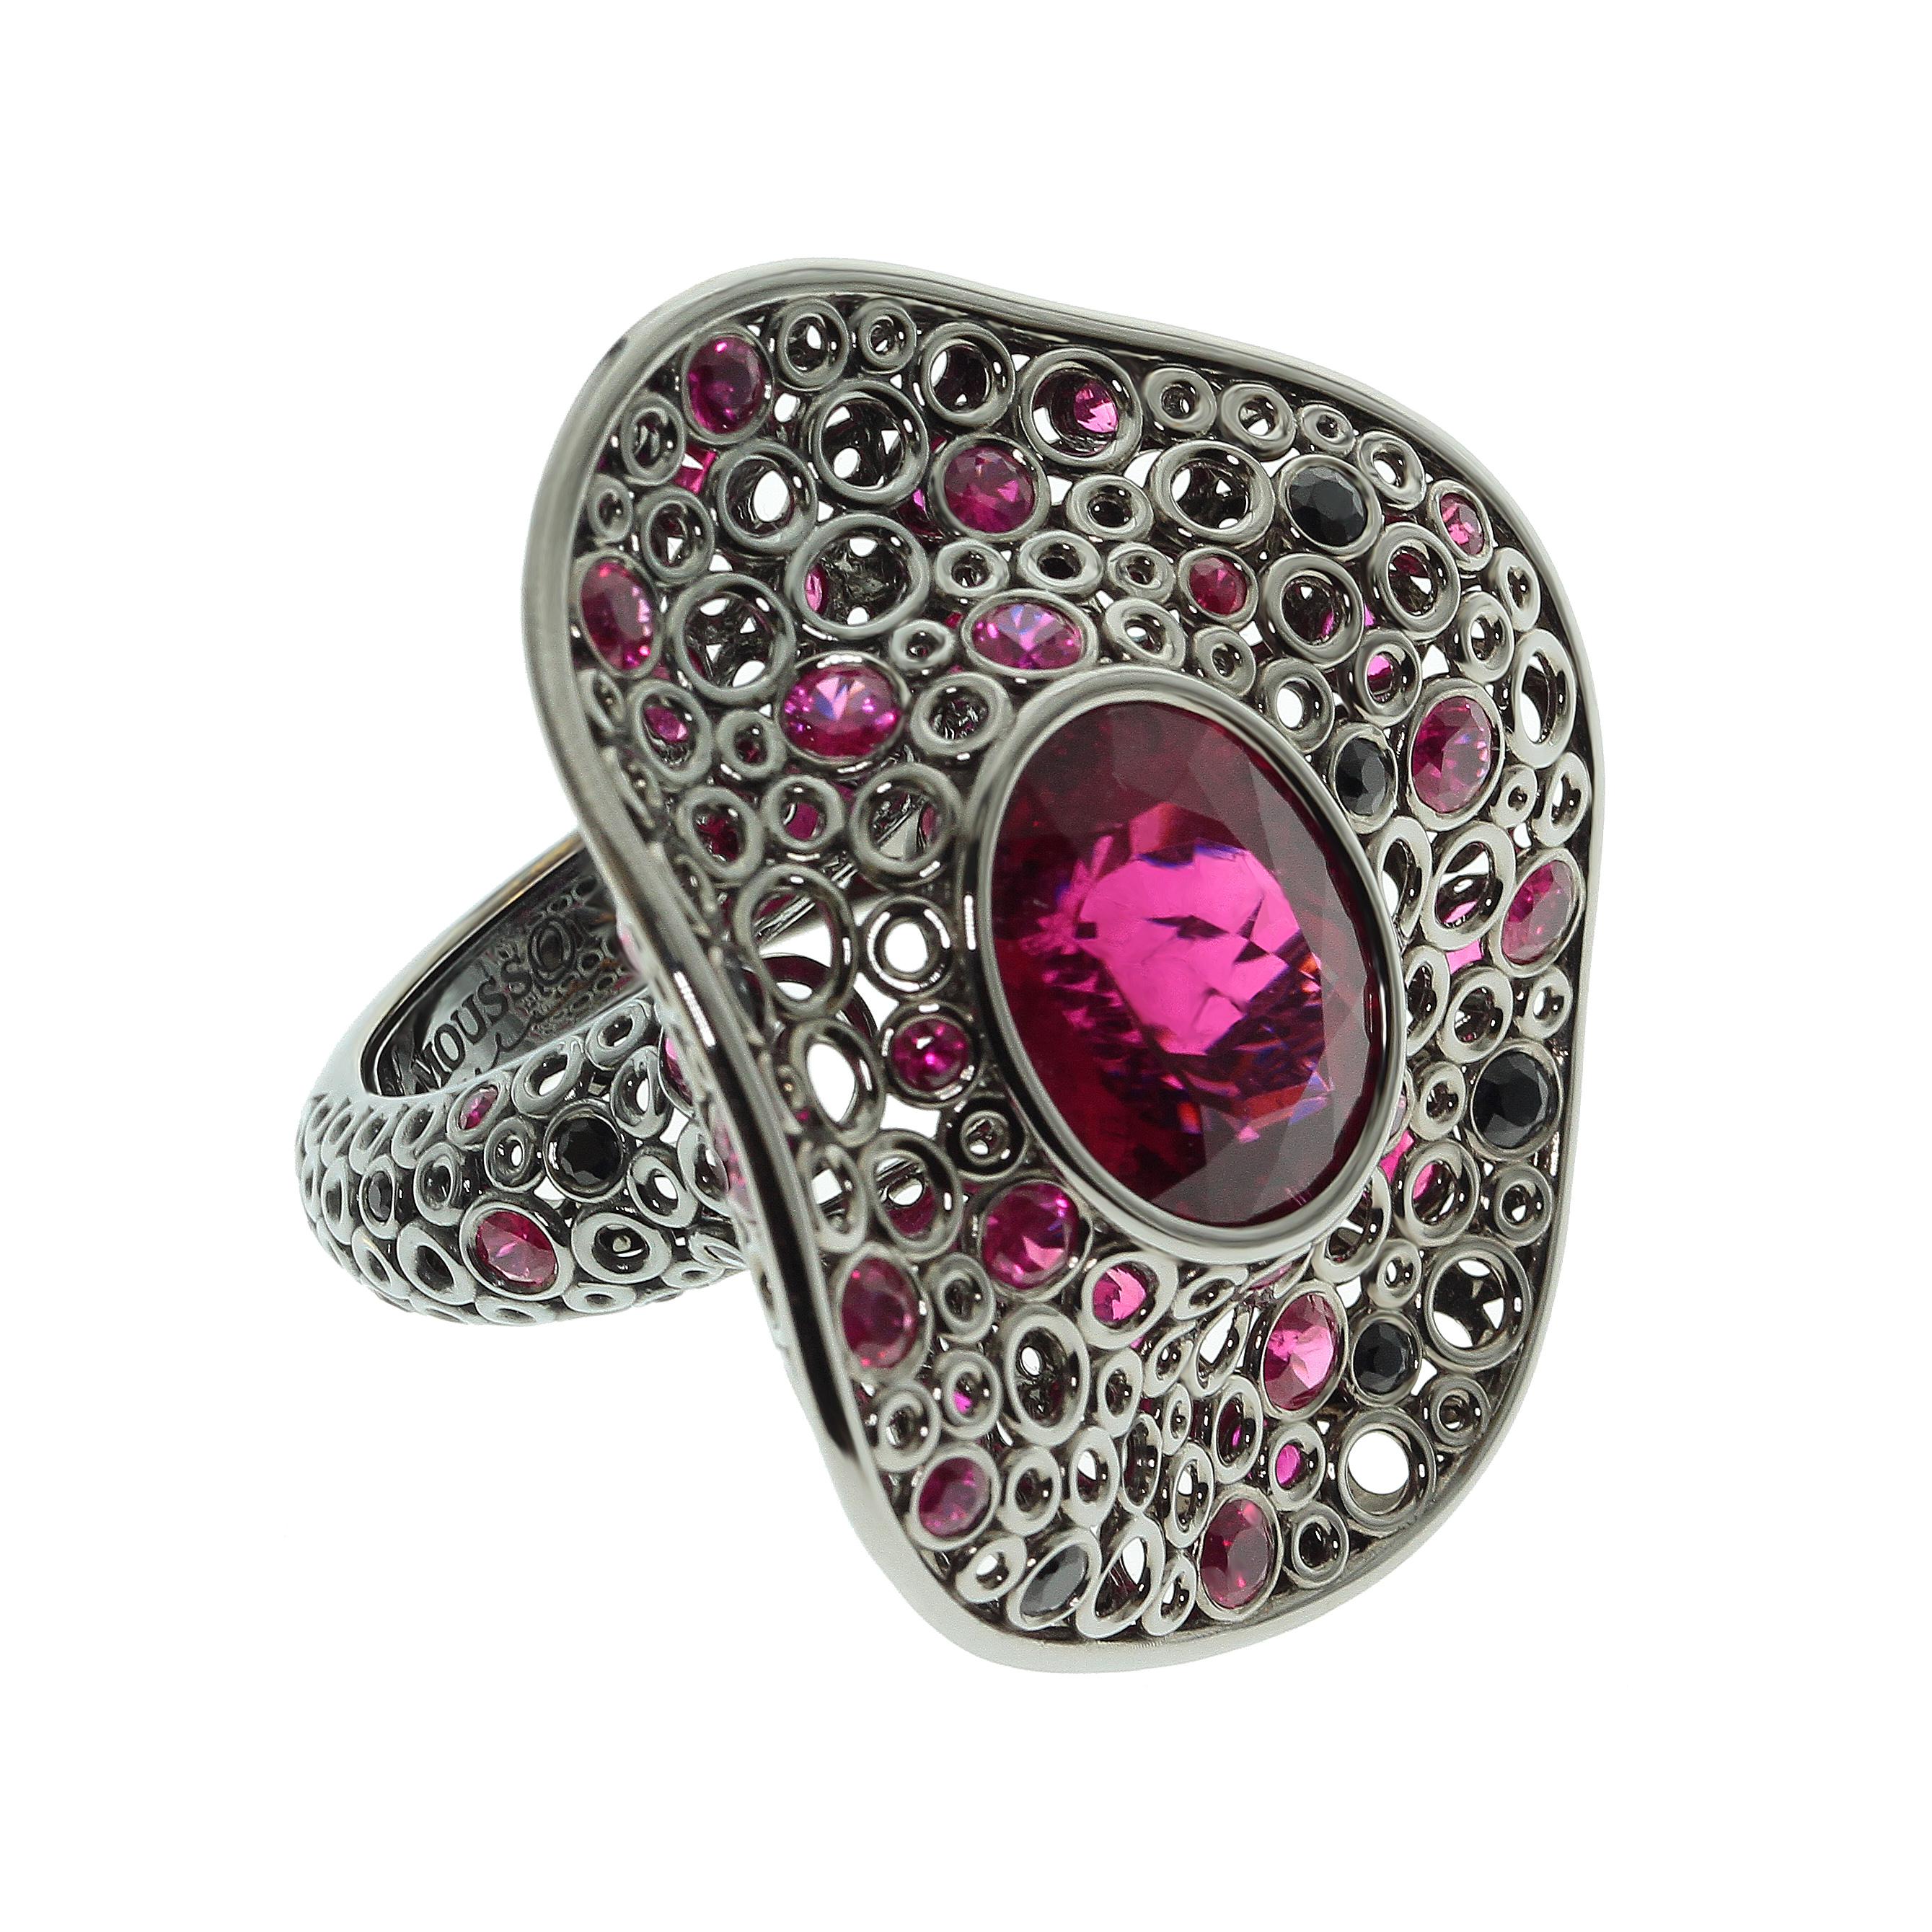 Rubellite Tourmaline 8.40 Carat, Ruby Sapphire 18 Karat Black Gold Cocktail Ring
From our Bubble Collection. See the sparkling Bubbles in the Foam of Stormy Sea.
Accompanied with the earrings LU116414762591

Size - US Size 7 1/4 // EU Size 54